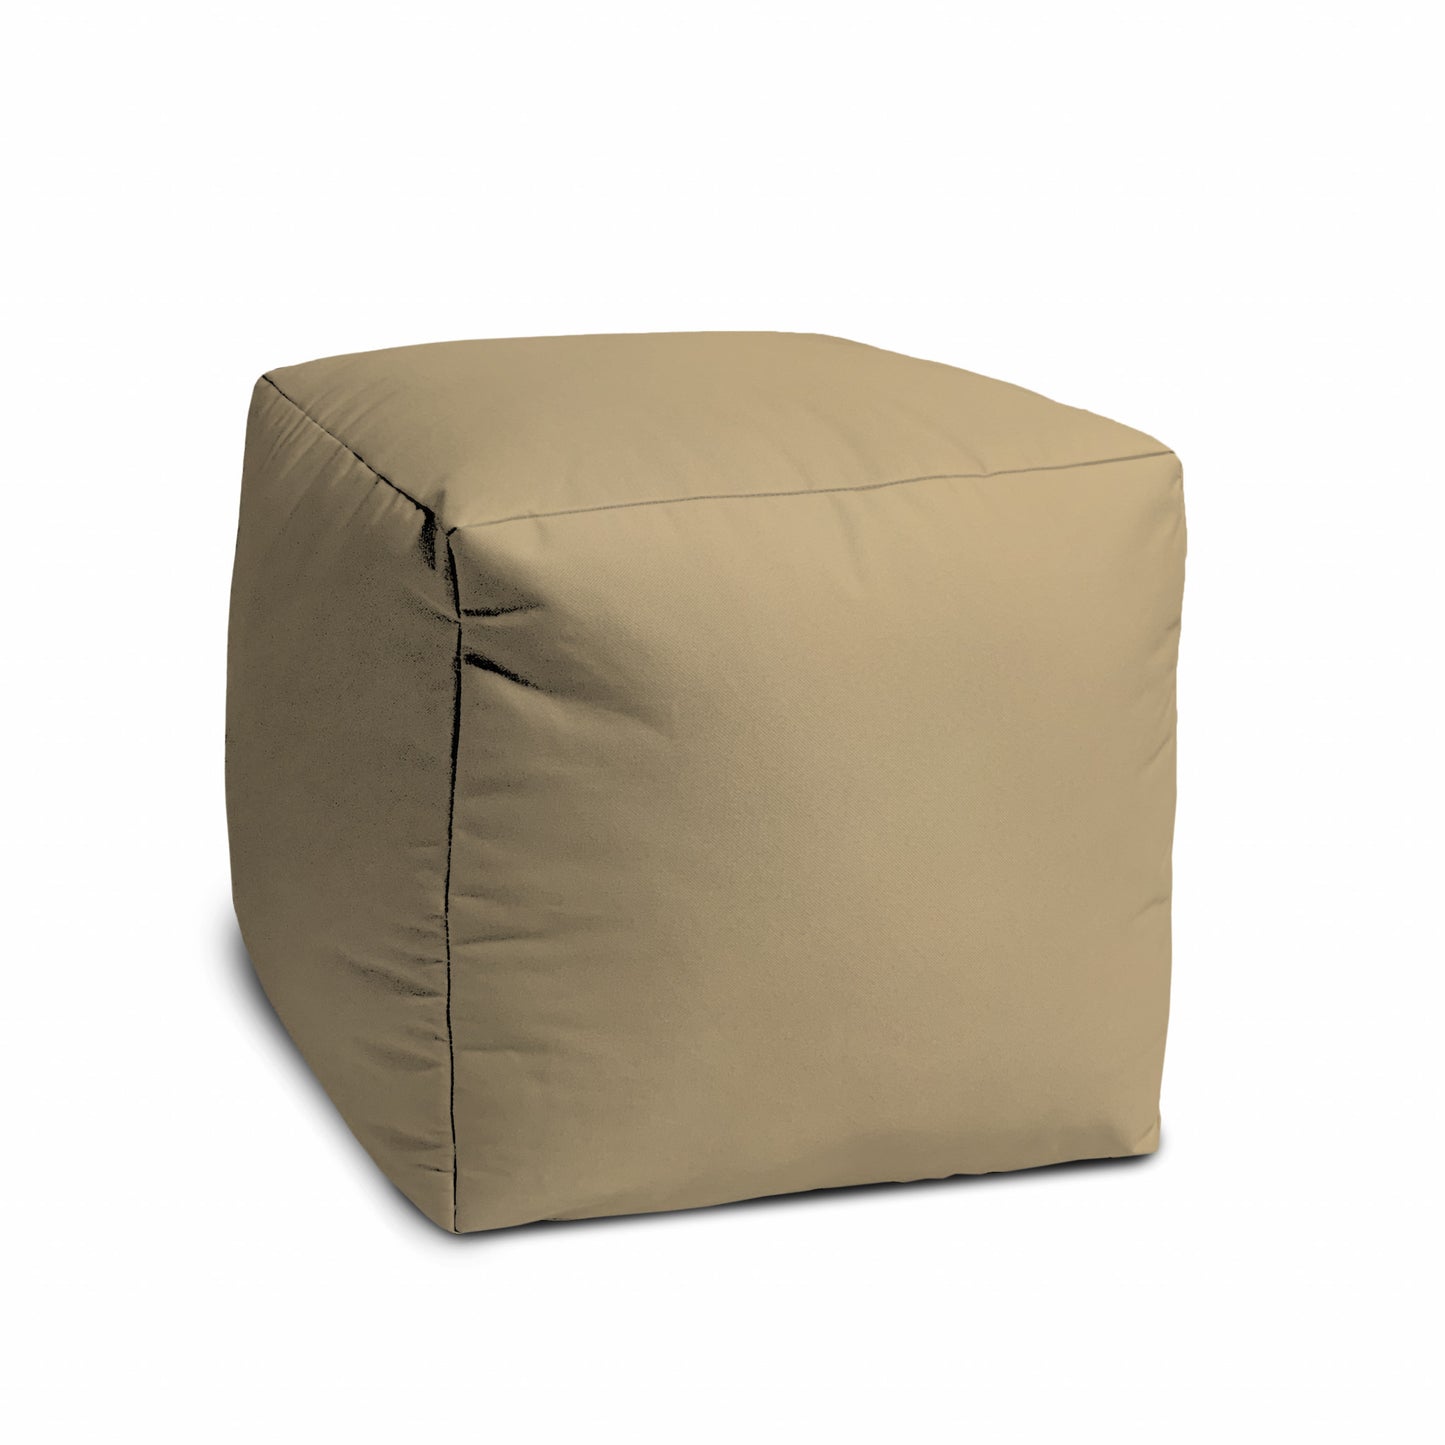 17" Cool Khaki Tan Solid Color Indoor Outdoor Pouf Ottoman